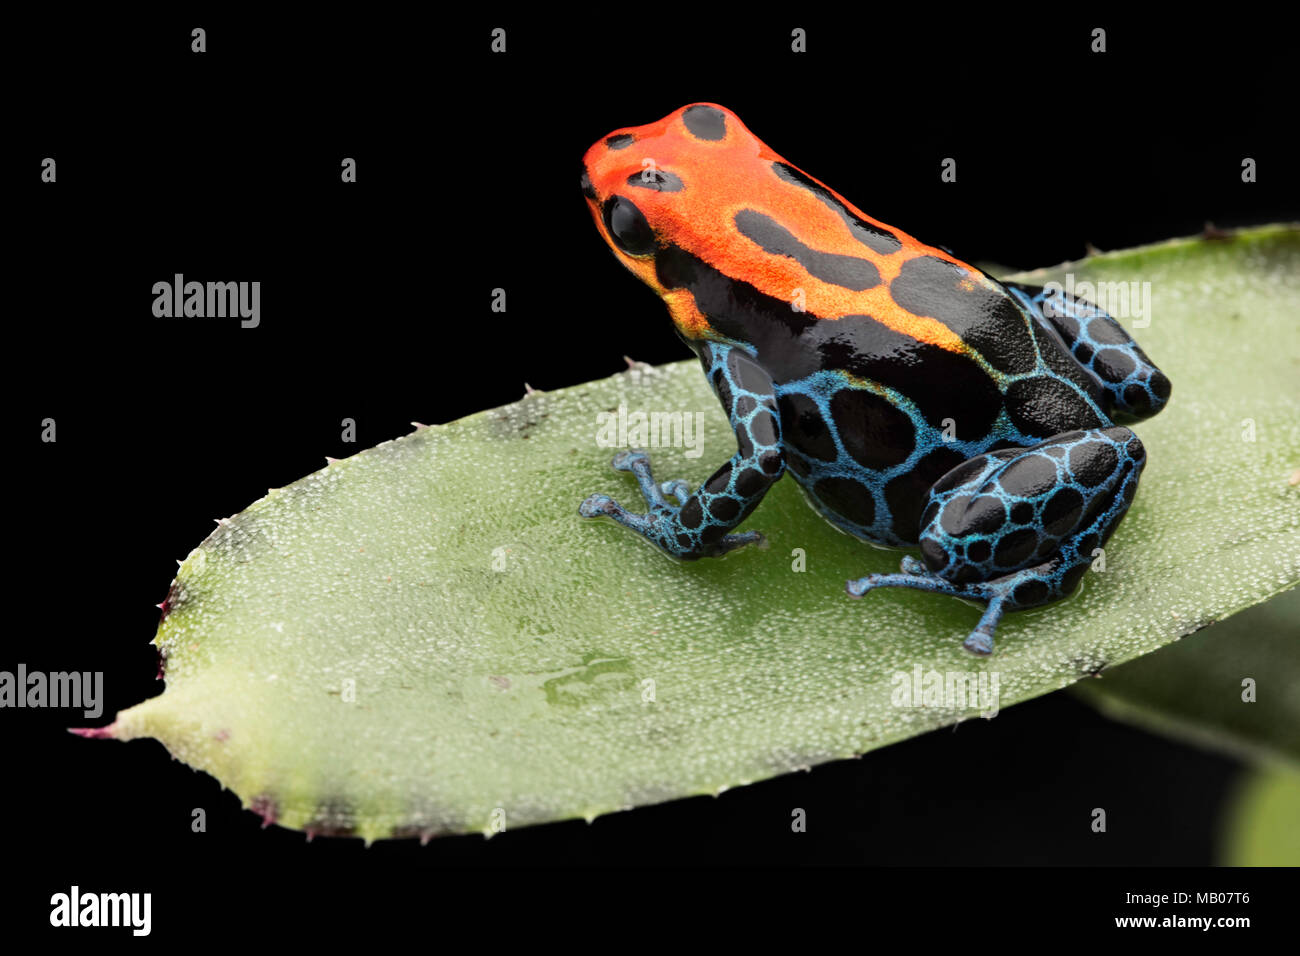 Amazonian Poison dart Frog, Ranitomeya ventrimaculata, Arena Blanca. Red blue poisonous animal from the Amazon rain forest of Peru. Stock Photo